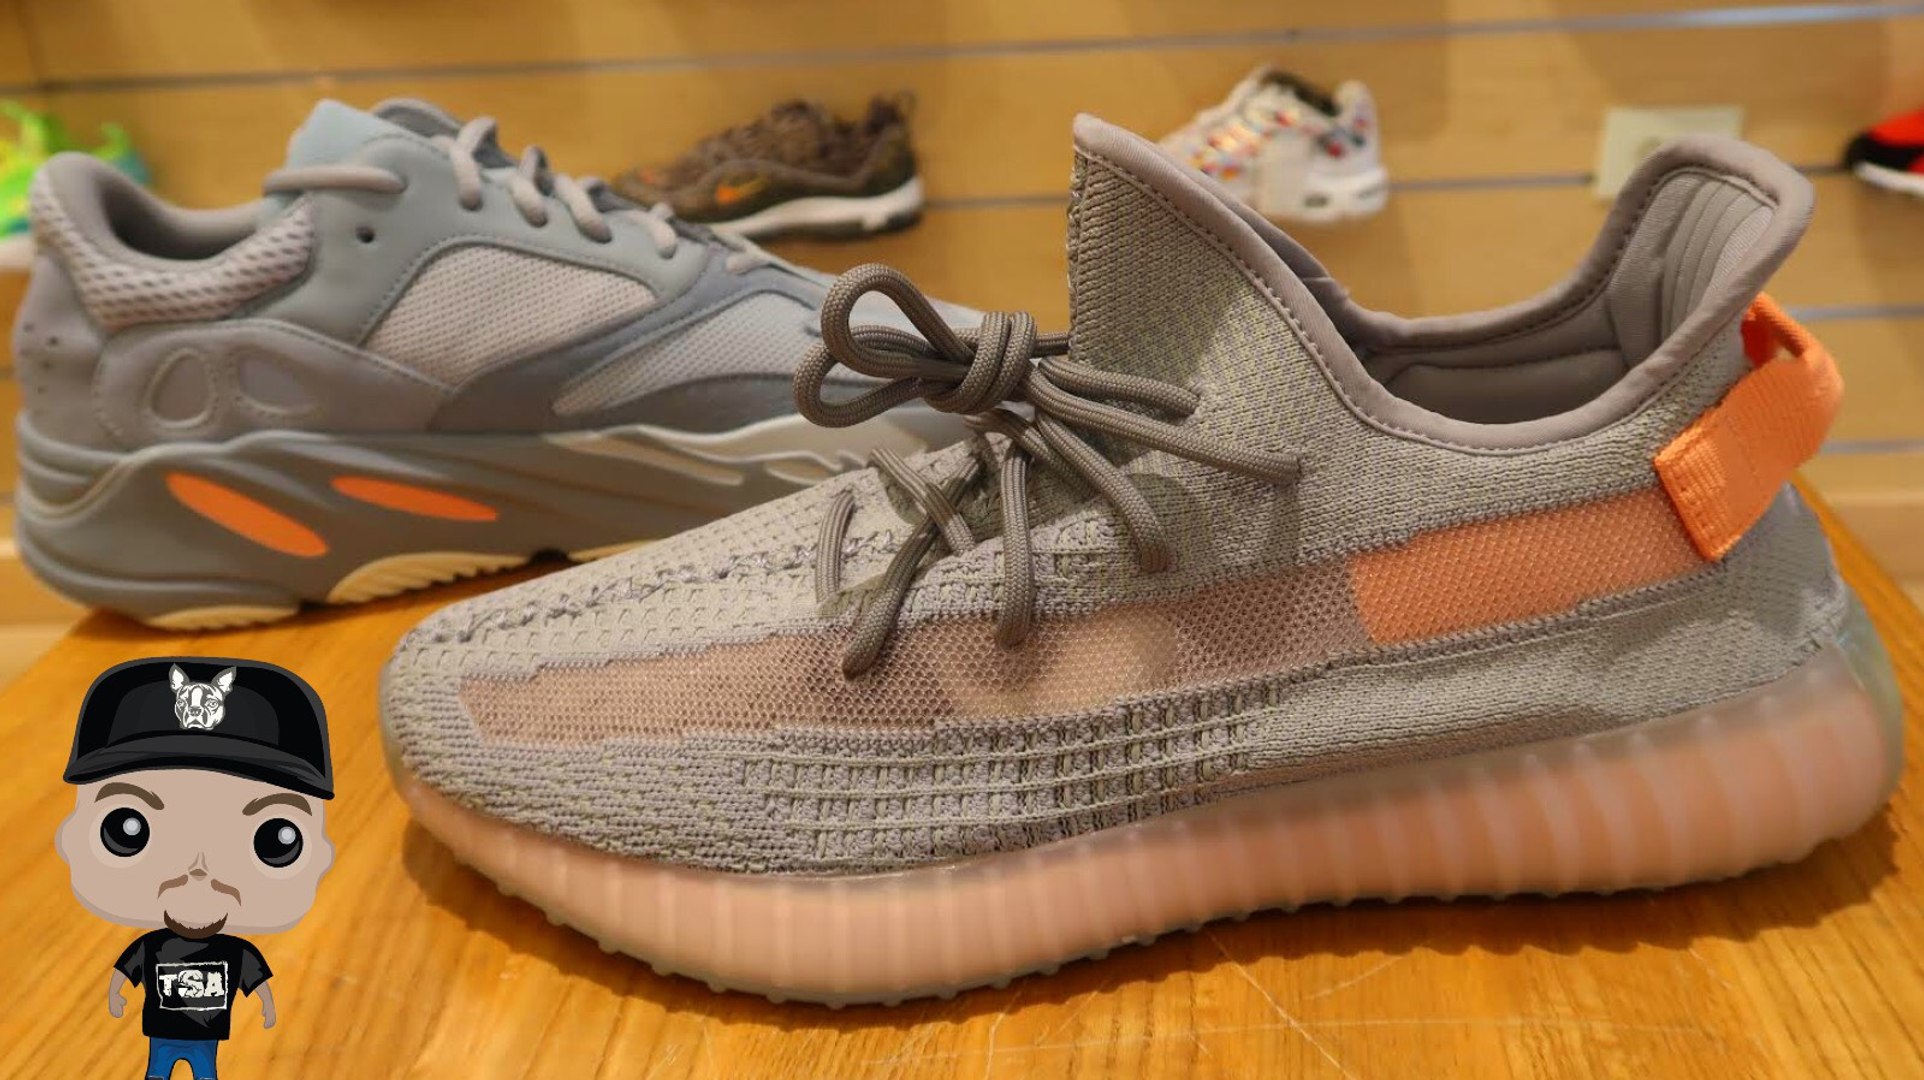 adidas YEEZY BOOST 350 V2 Trfrm Kanye West Sneaker Detailed Look VS 700  Inertia Shoes #Yeezy - video Dailymotion